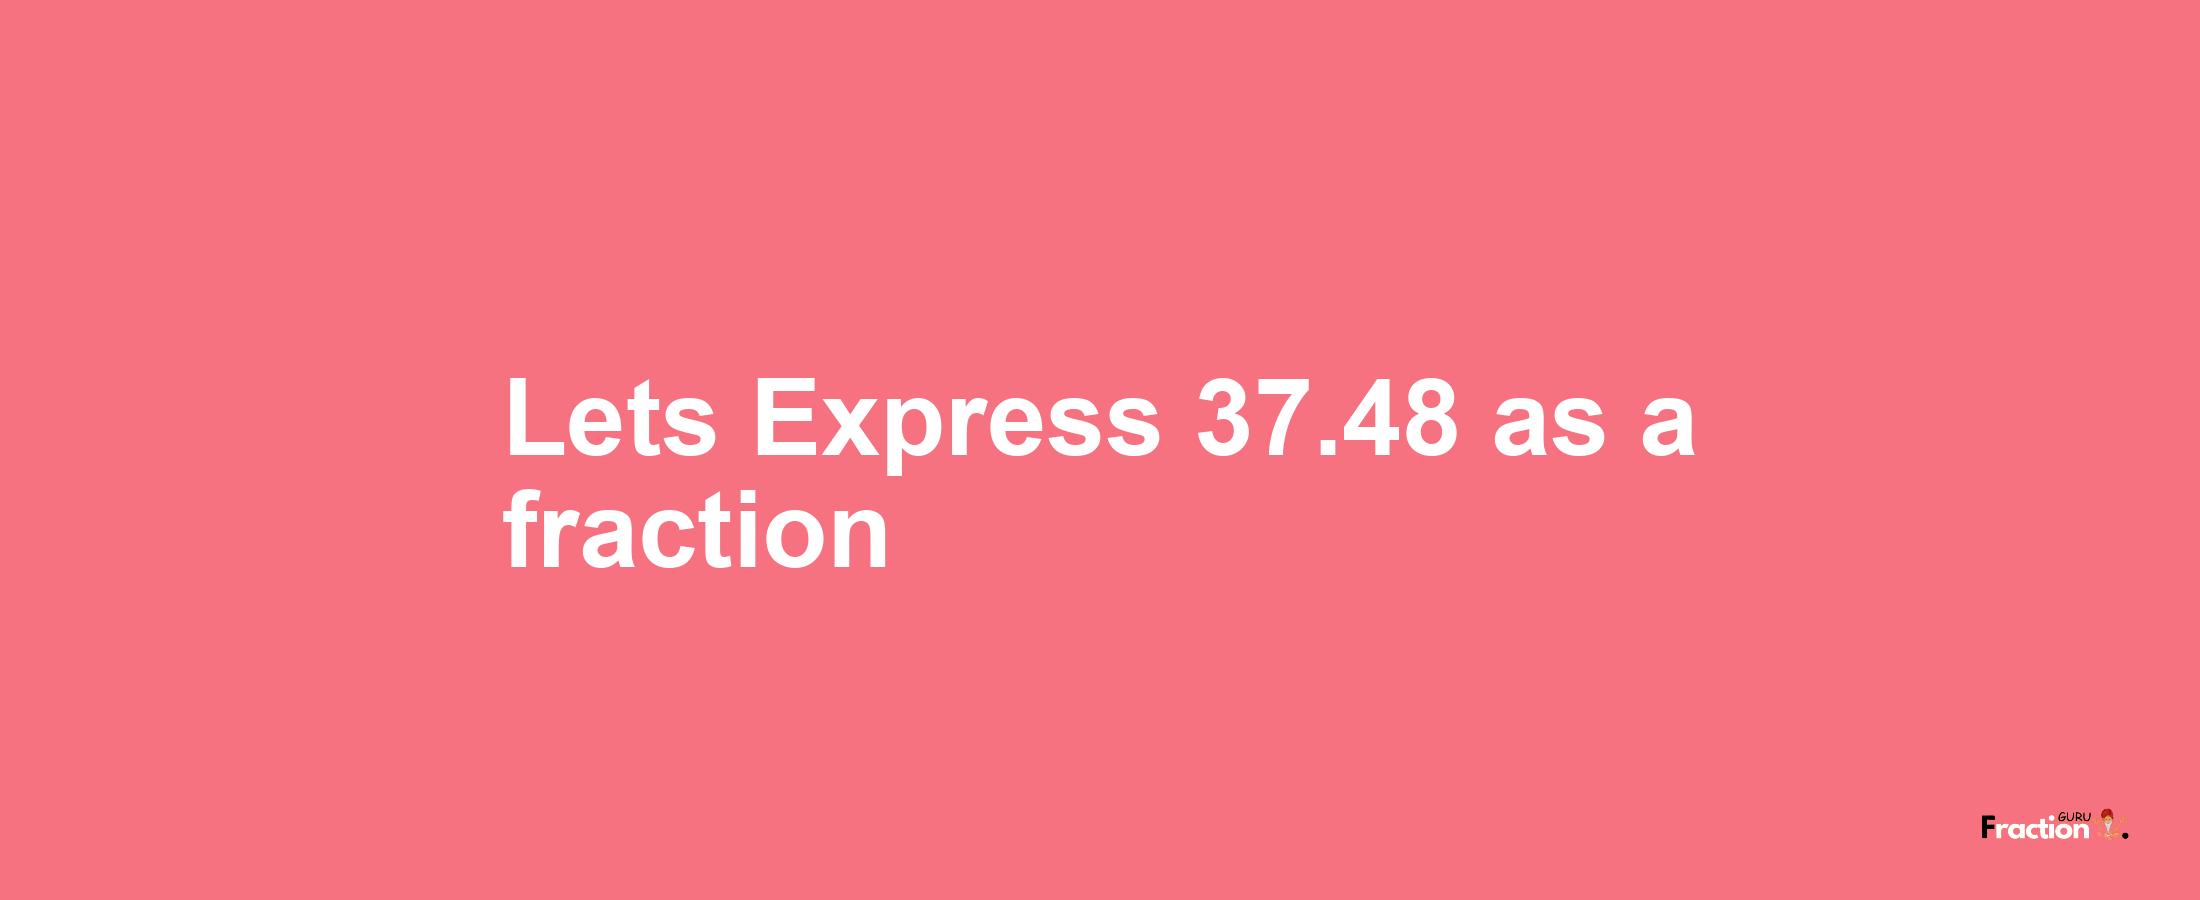 Lets Express 37.48 as afraction